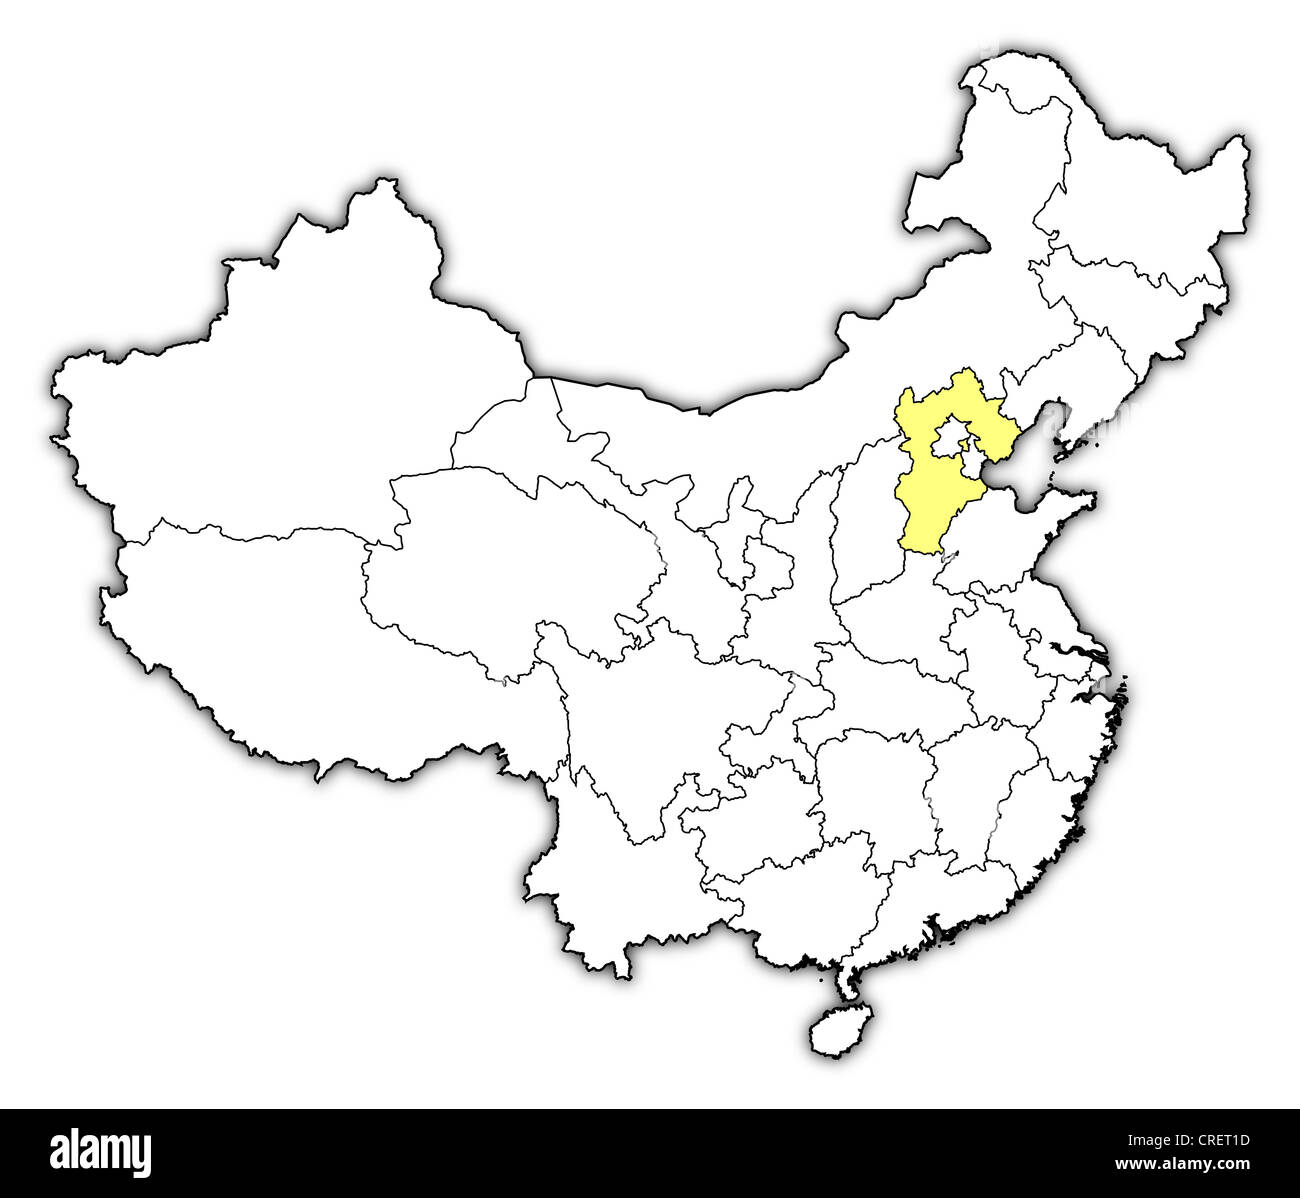 Political map of China with the several provinces where Hebei is highlighted. Stock Photo